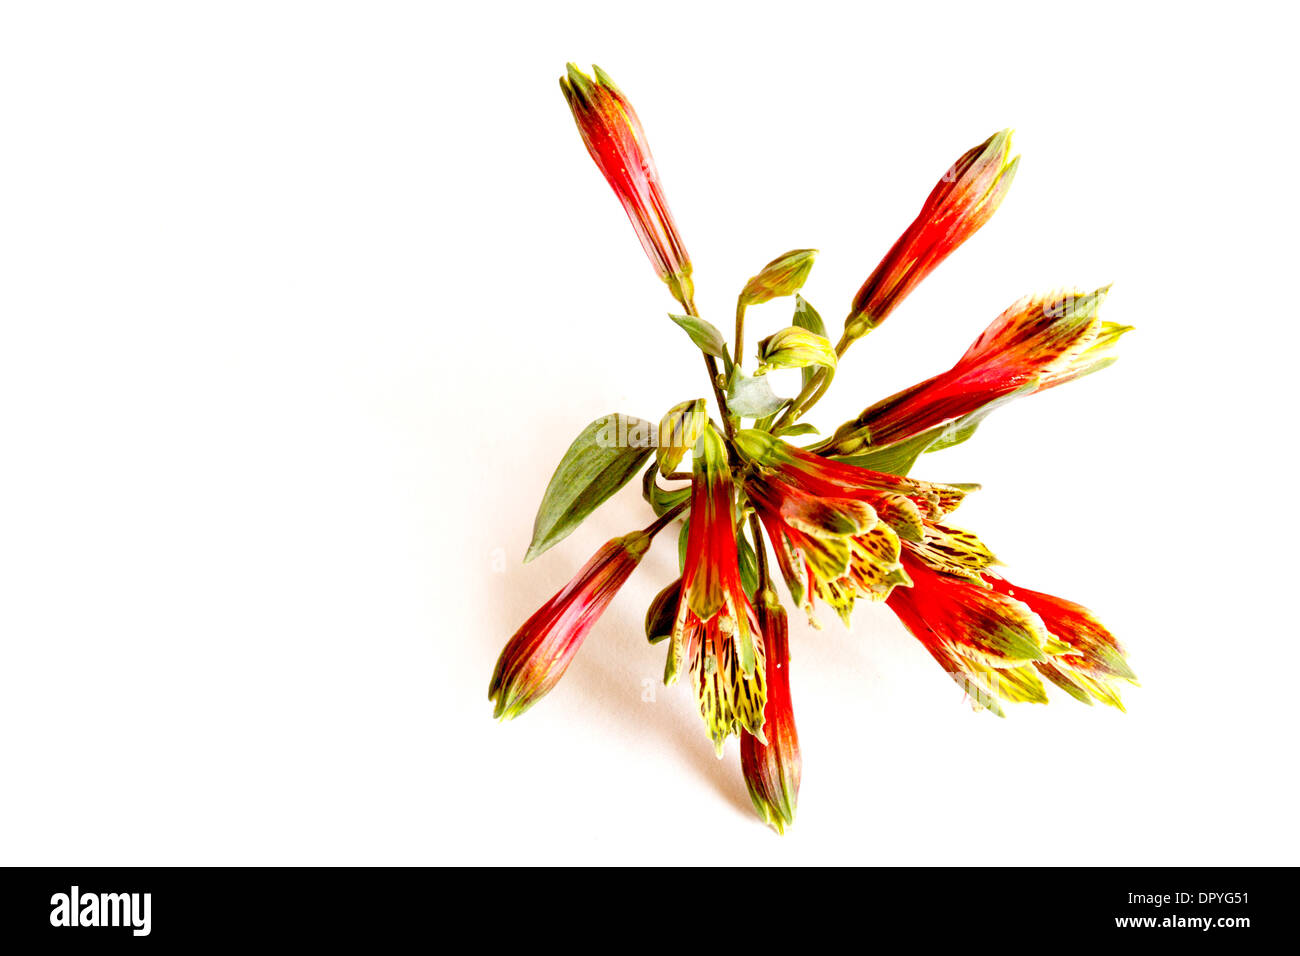 studio closeup of red and green alstroemeria flower on white background Stock Photo